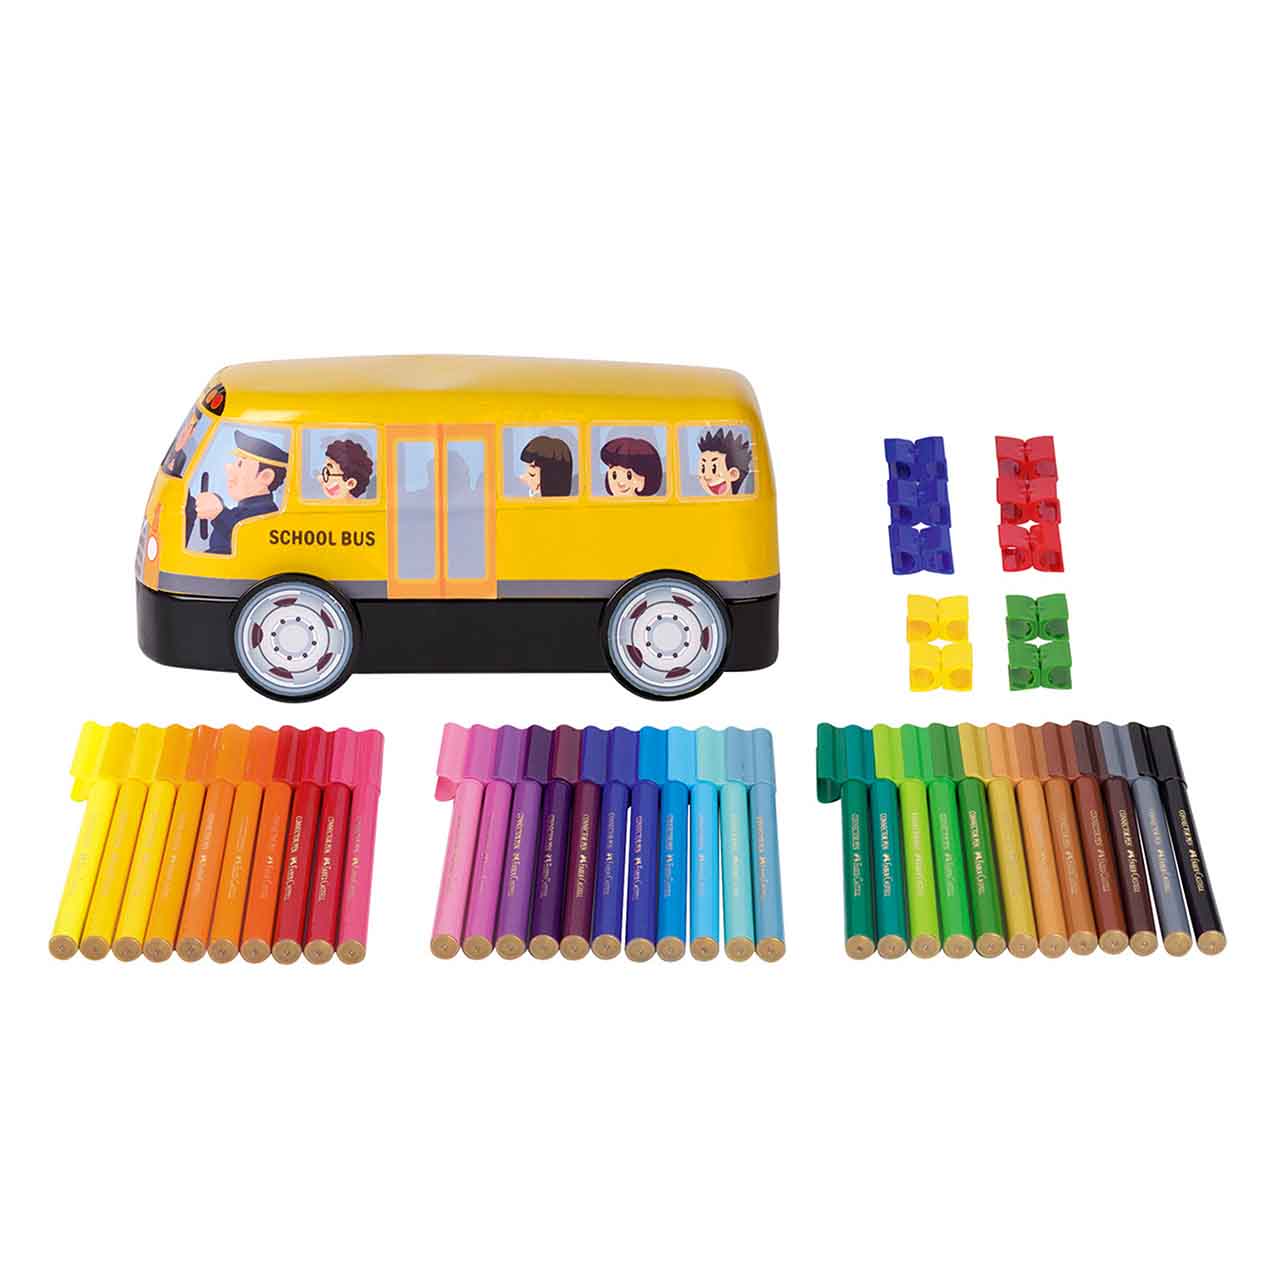 Image shows a Faber-Castell 'school bus like' container with connector pens (displaying  it's contents)